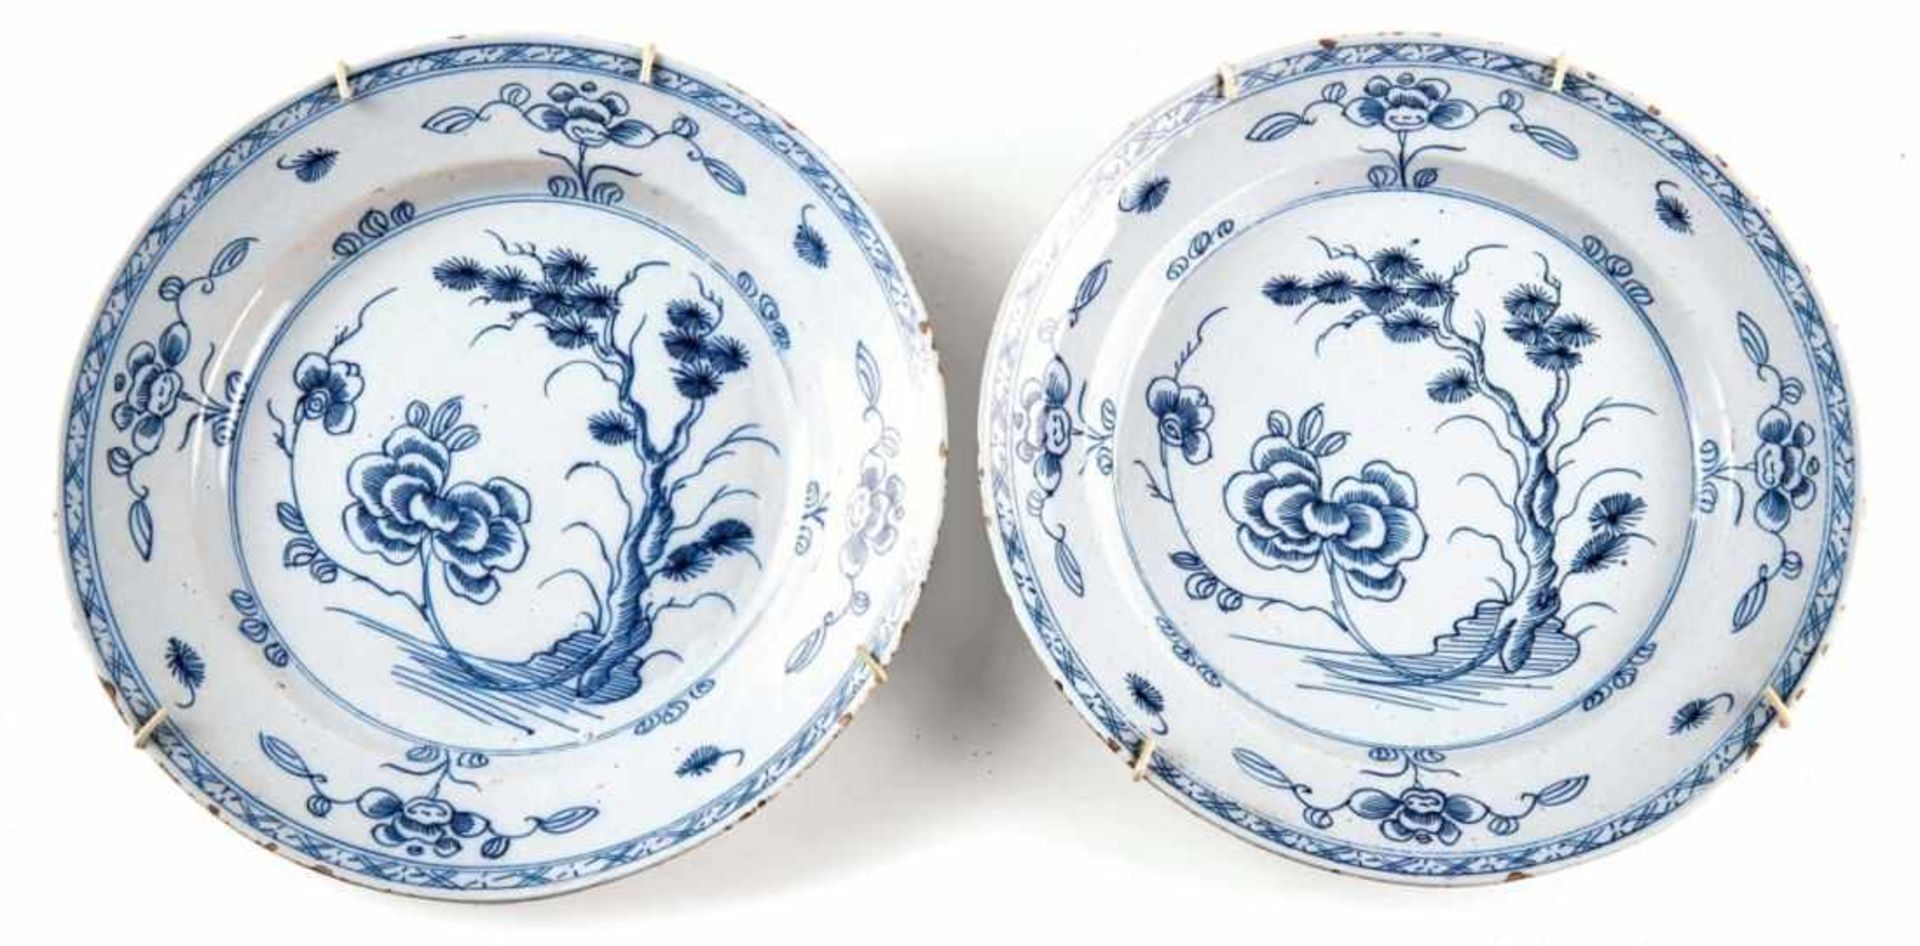 Pair of blue and white plates with Chinoiserie